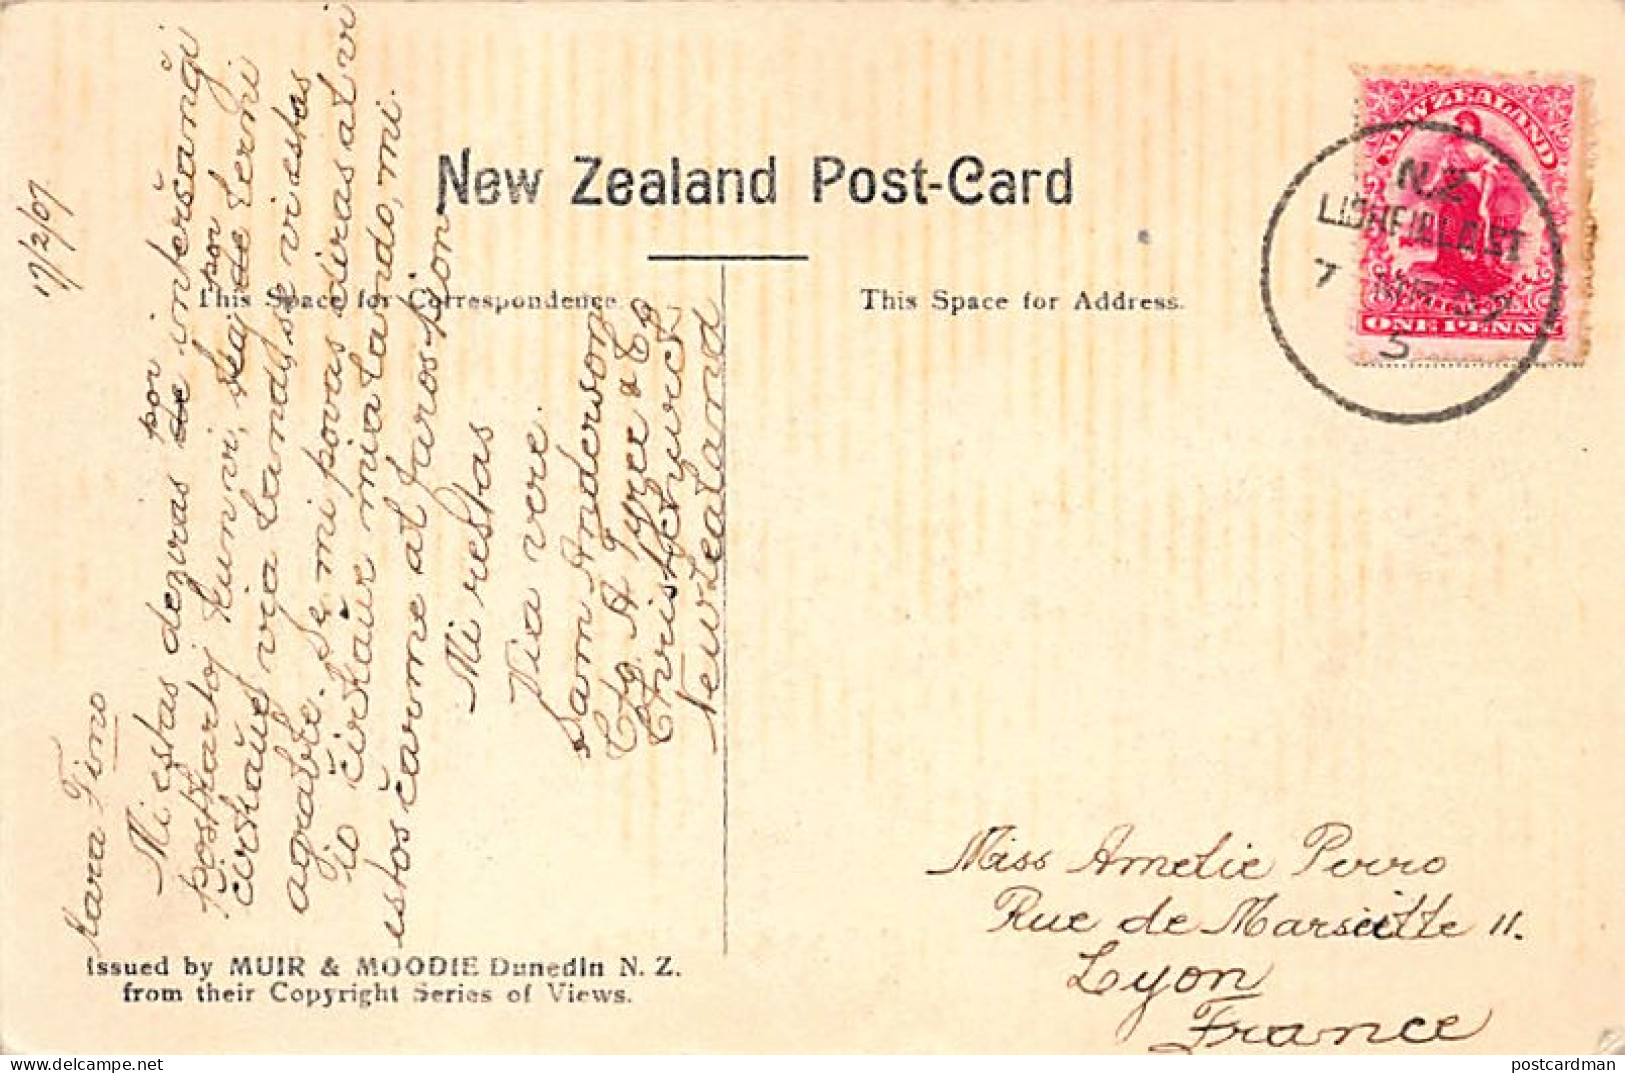 New Zealand - CHRISTCHURCHCathedral Square - Publ. Muir & Moodie 951 - New Zealand